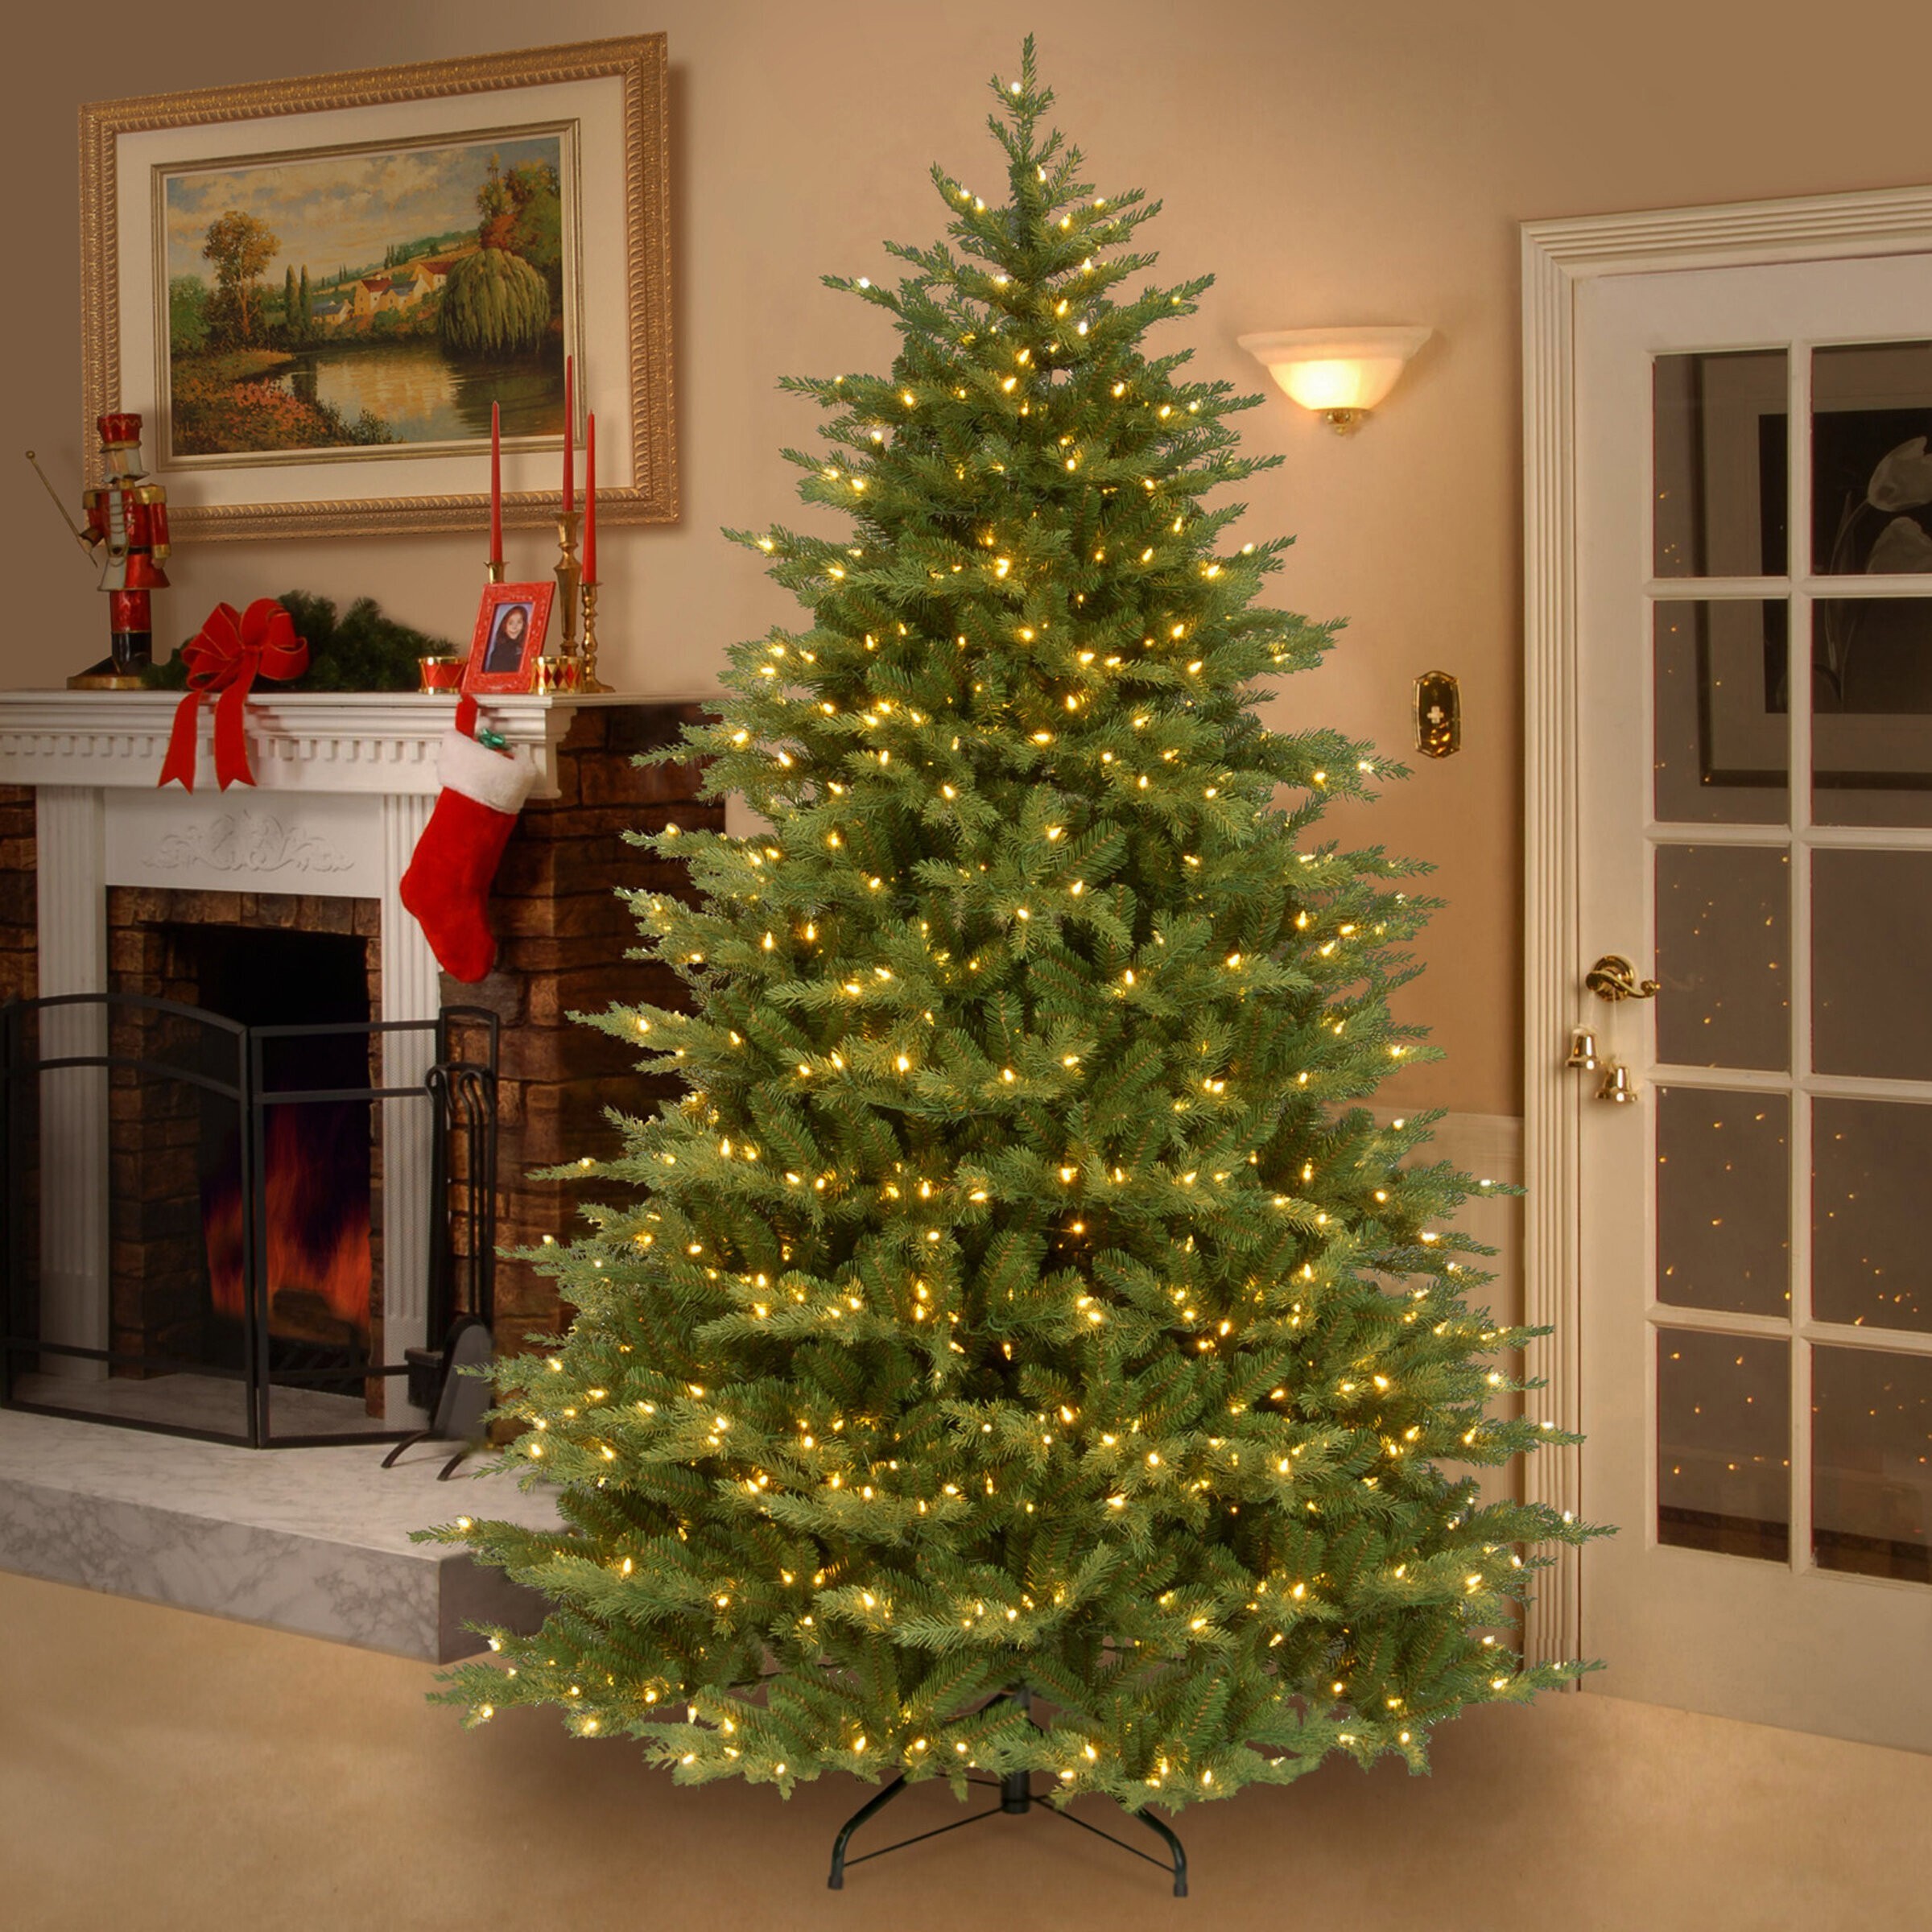 Real Vs. Artificial Christmas Tree - Which One to Choose? - Foter